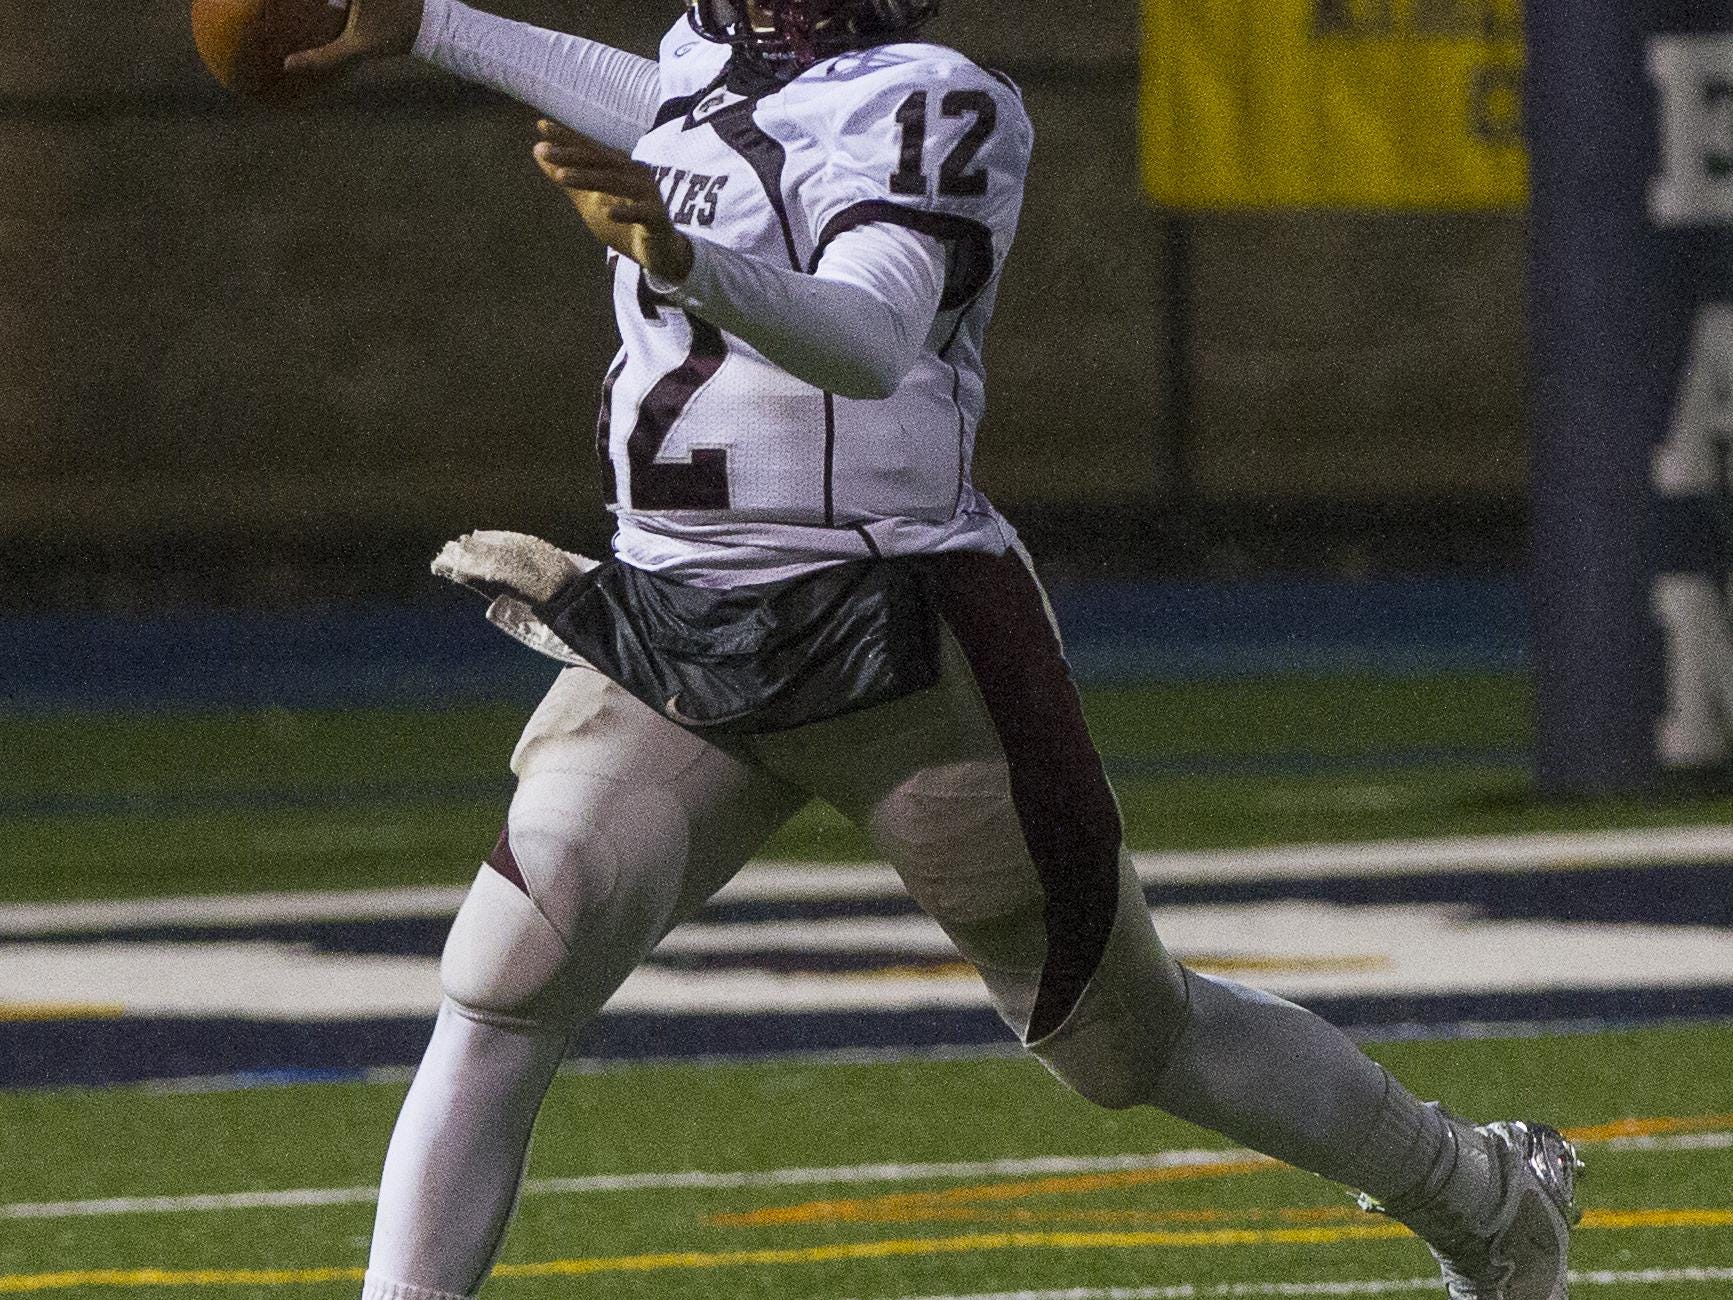 Matawan’s George Pearson throws against Carteret in the Central Group III football championship at Kean University on Dec. 5, 2014.